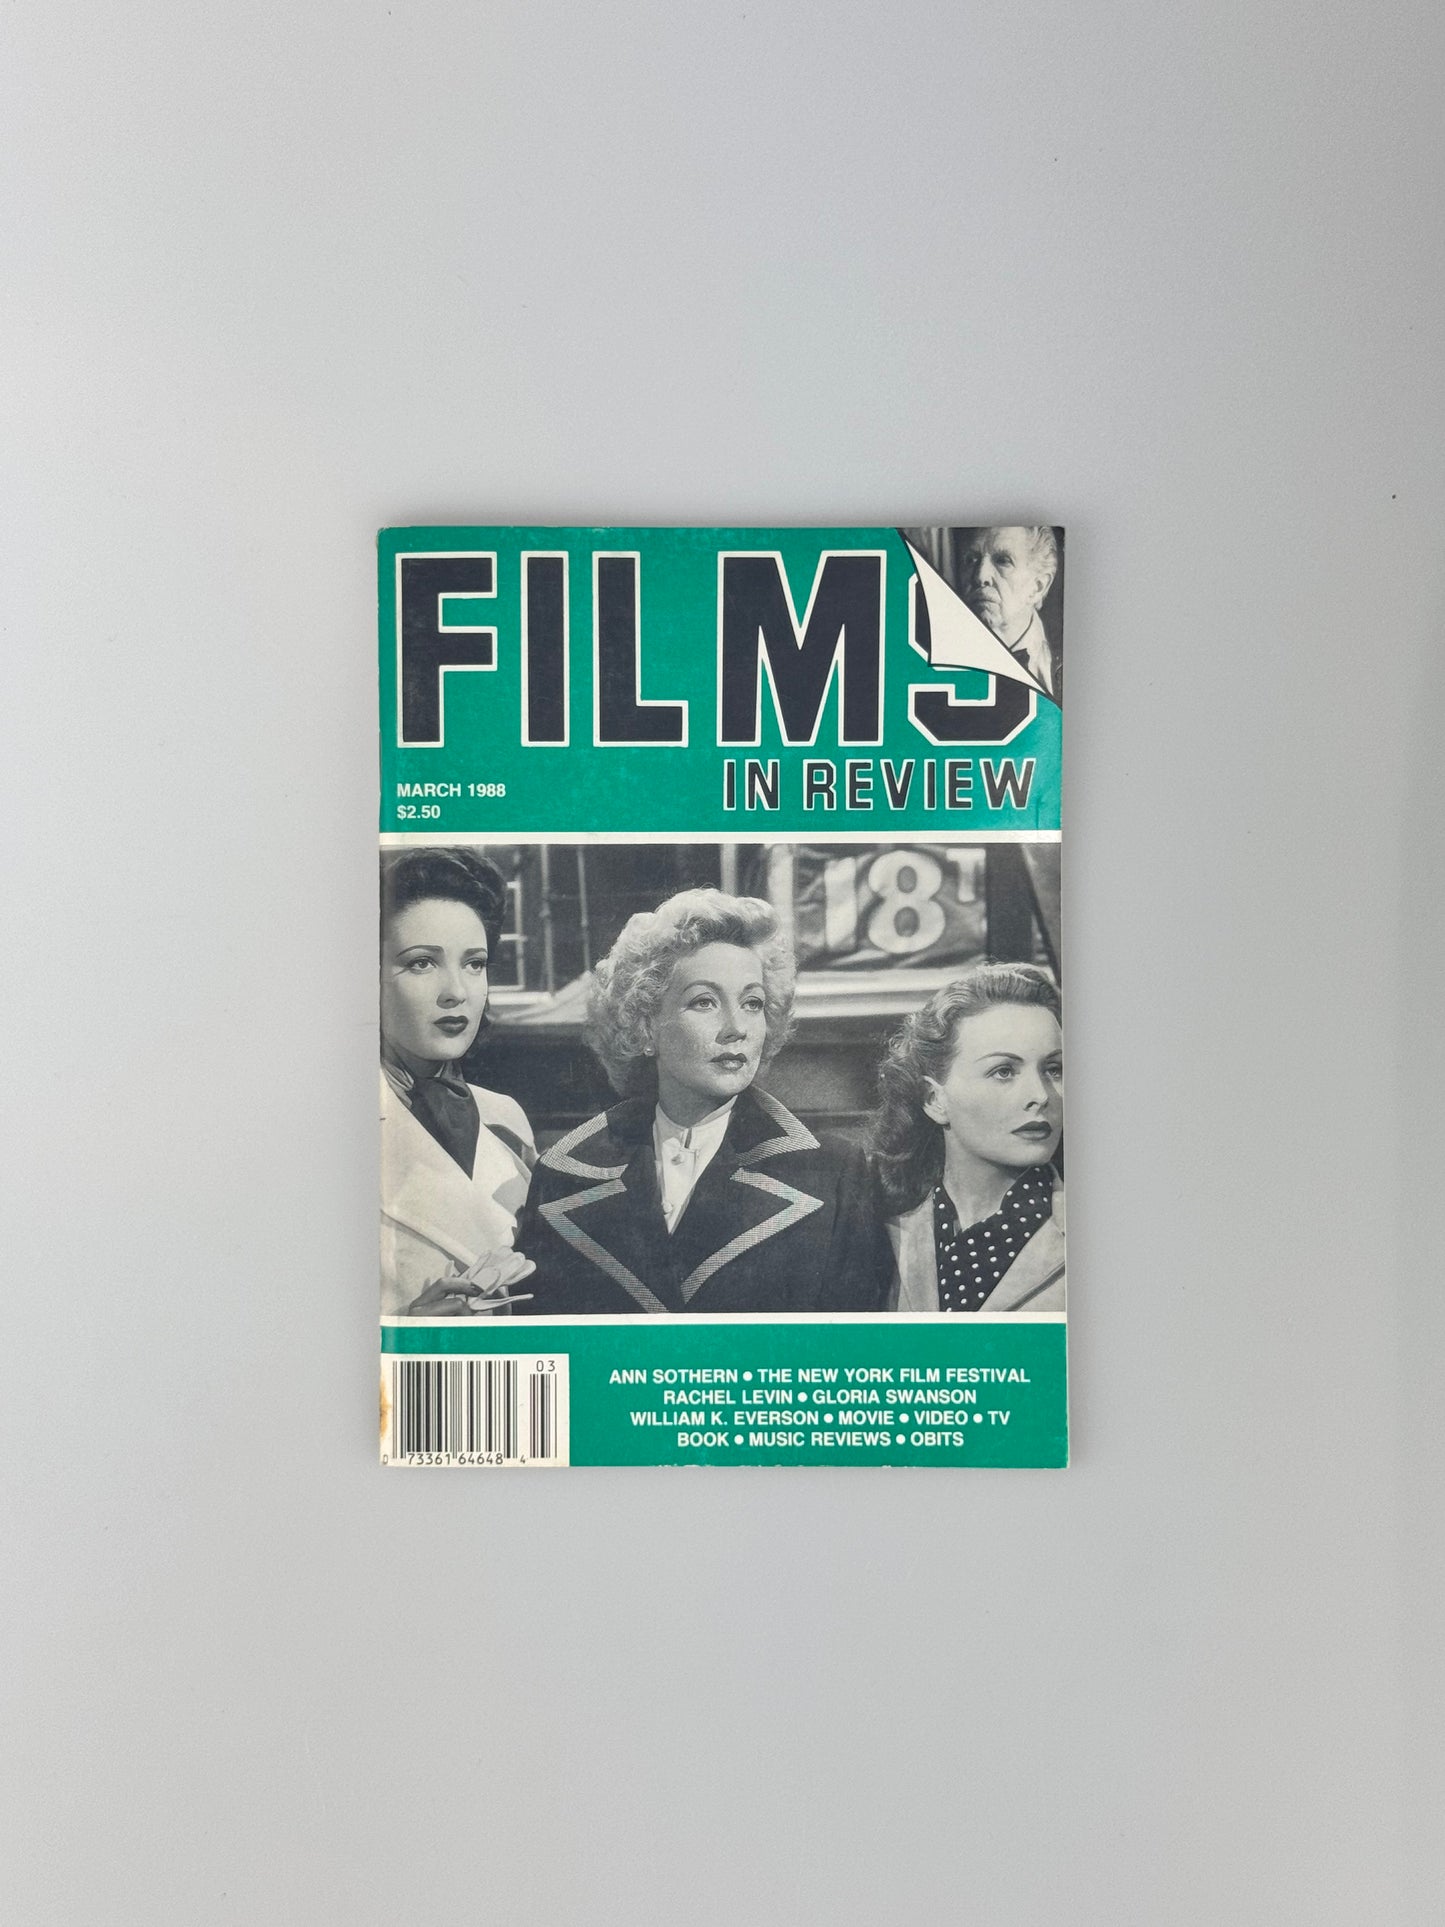 Films In Review Magazine - March 1988 - Ann Sothern, NY Film Festival, Empire Of The Sun, Good Morning Vietnam